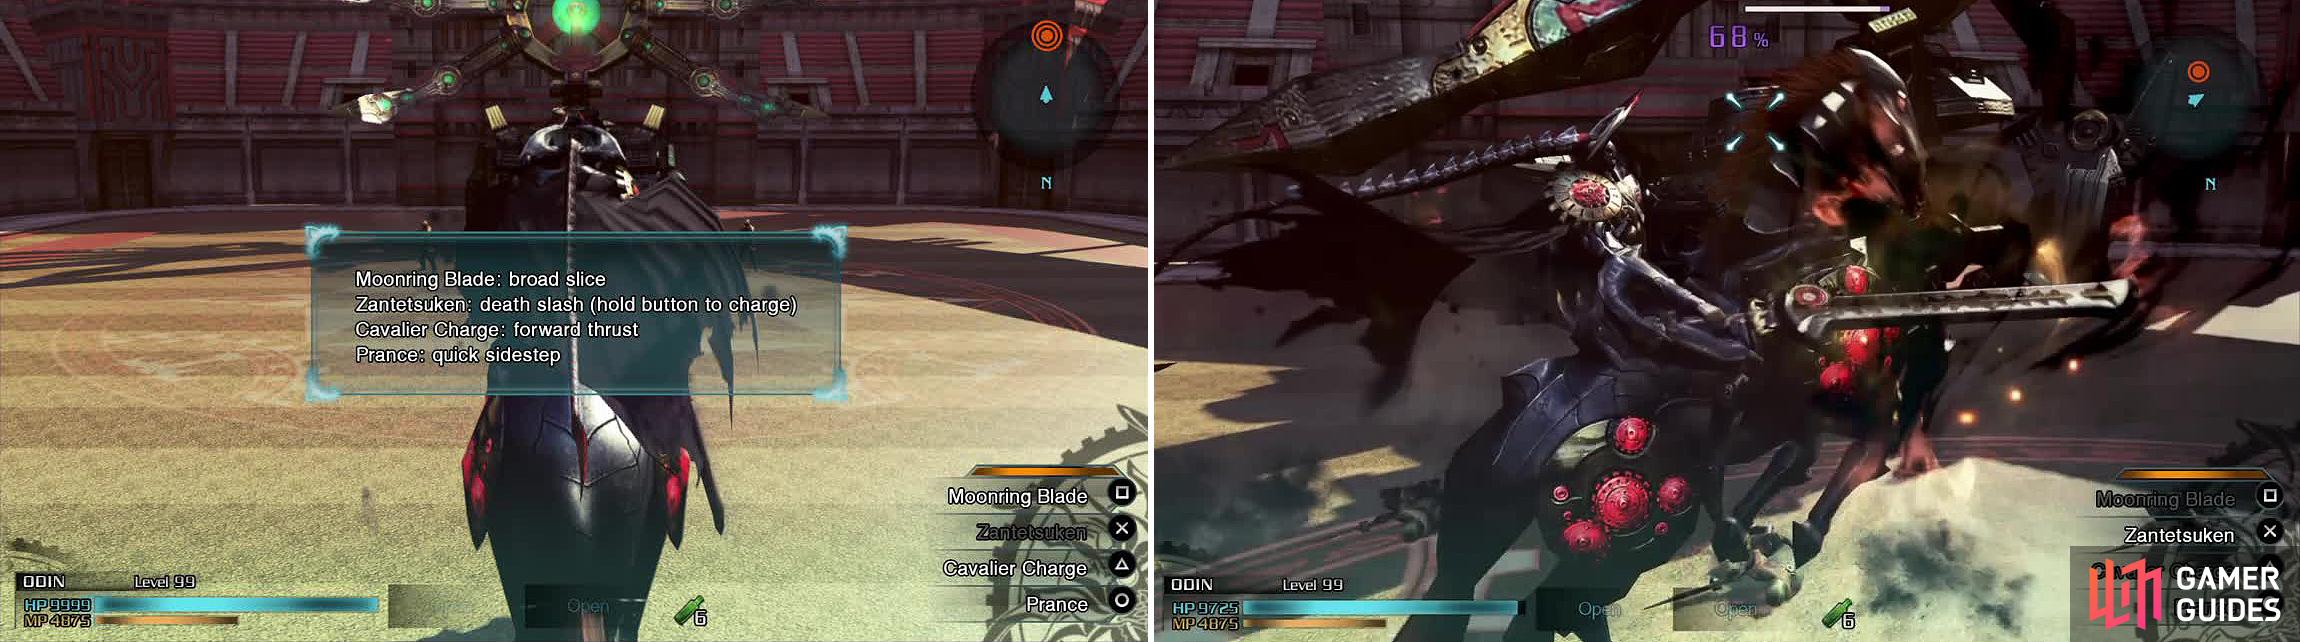 While Odin’s Moonring Blade will do a lot of damage, charge up Zantetsuken fully (you can see the percentage in blue above his head) to instantly kill the Dainsleif.